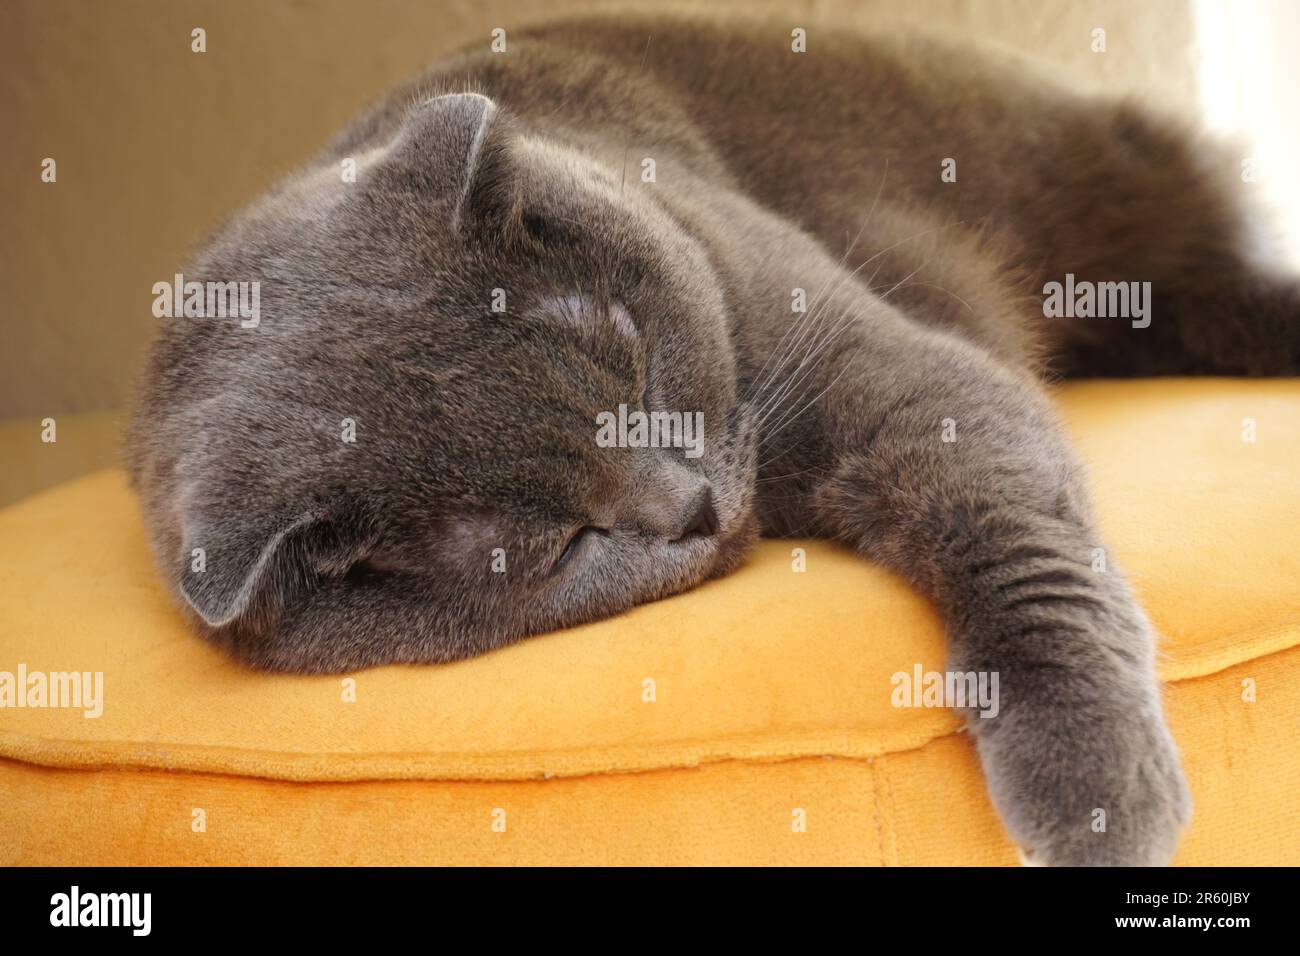 Cute scottish fold cat sleeping on the couch portrait close up view Stock Photo